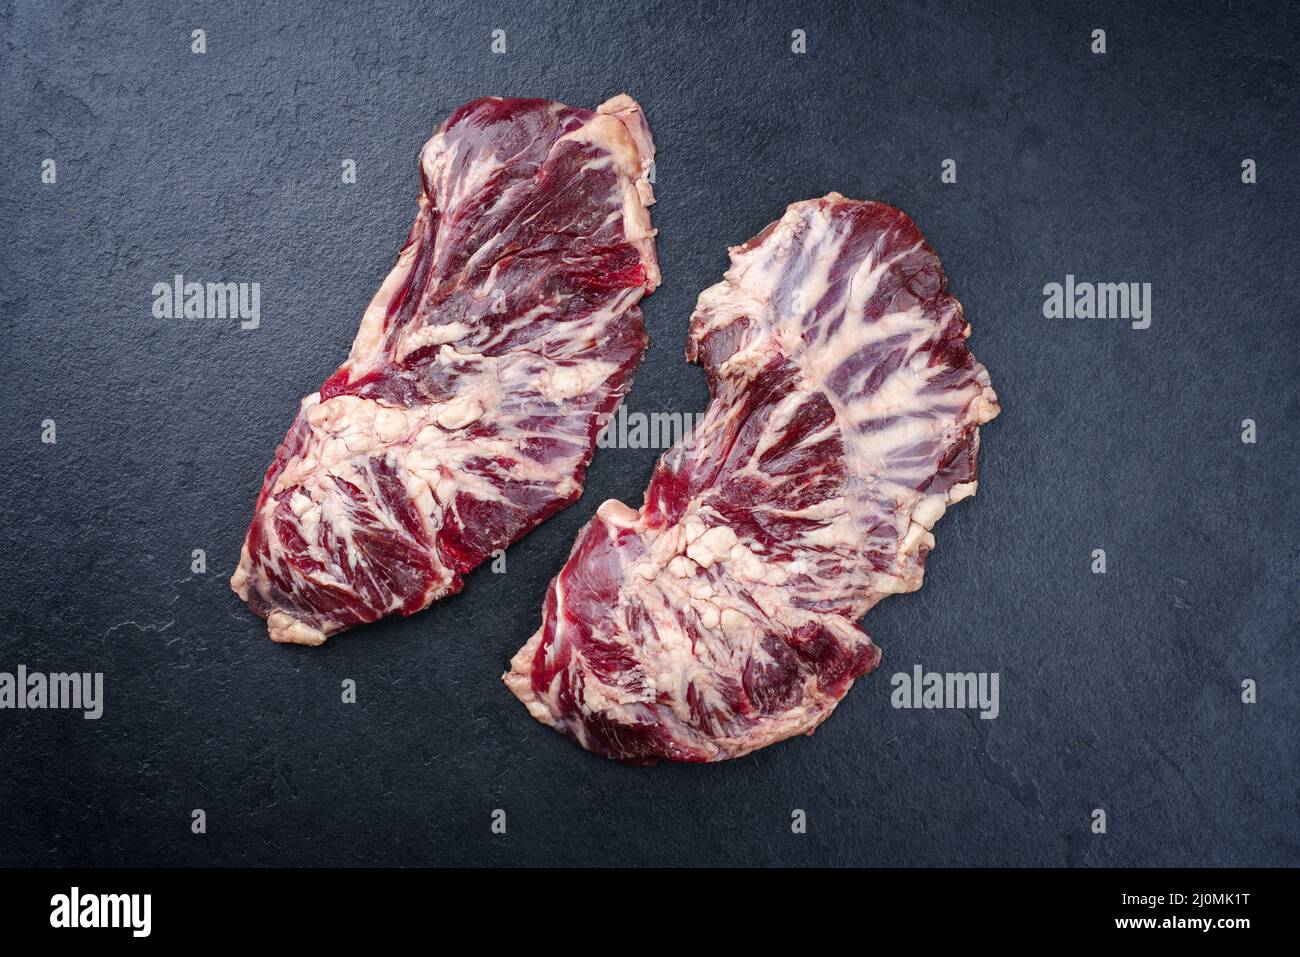 Raw wagyu spider beef steak offered as top view on a black board with copy space Stock Photo